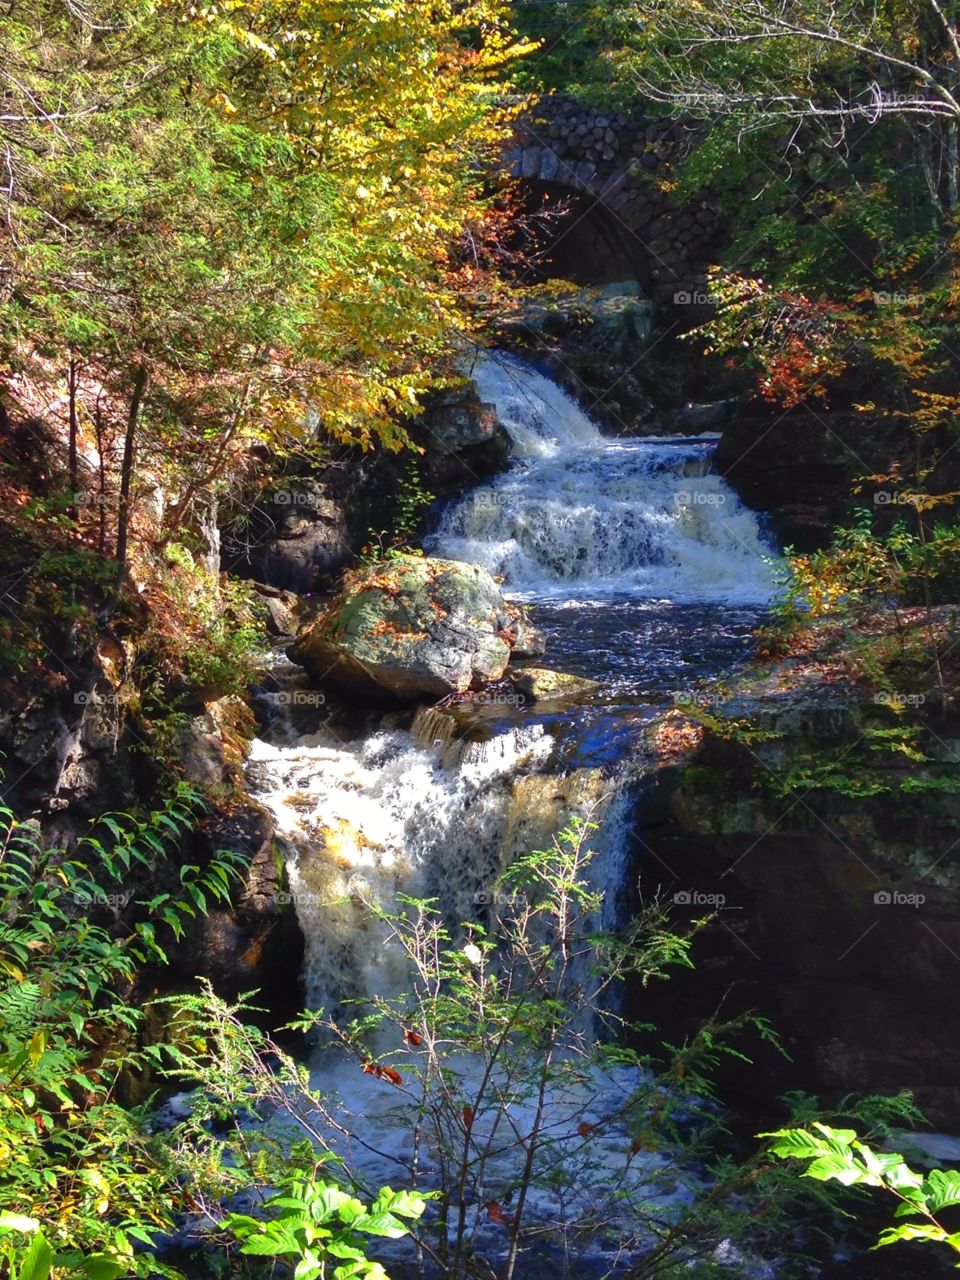 Waterfall in Royalston MA. . A place my dad took me to as a kid .... Revisited with my kids..... 